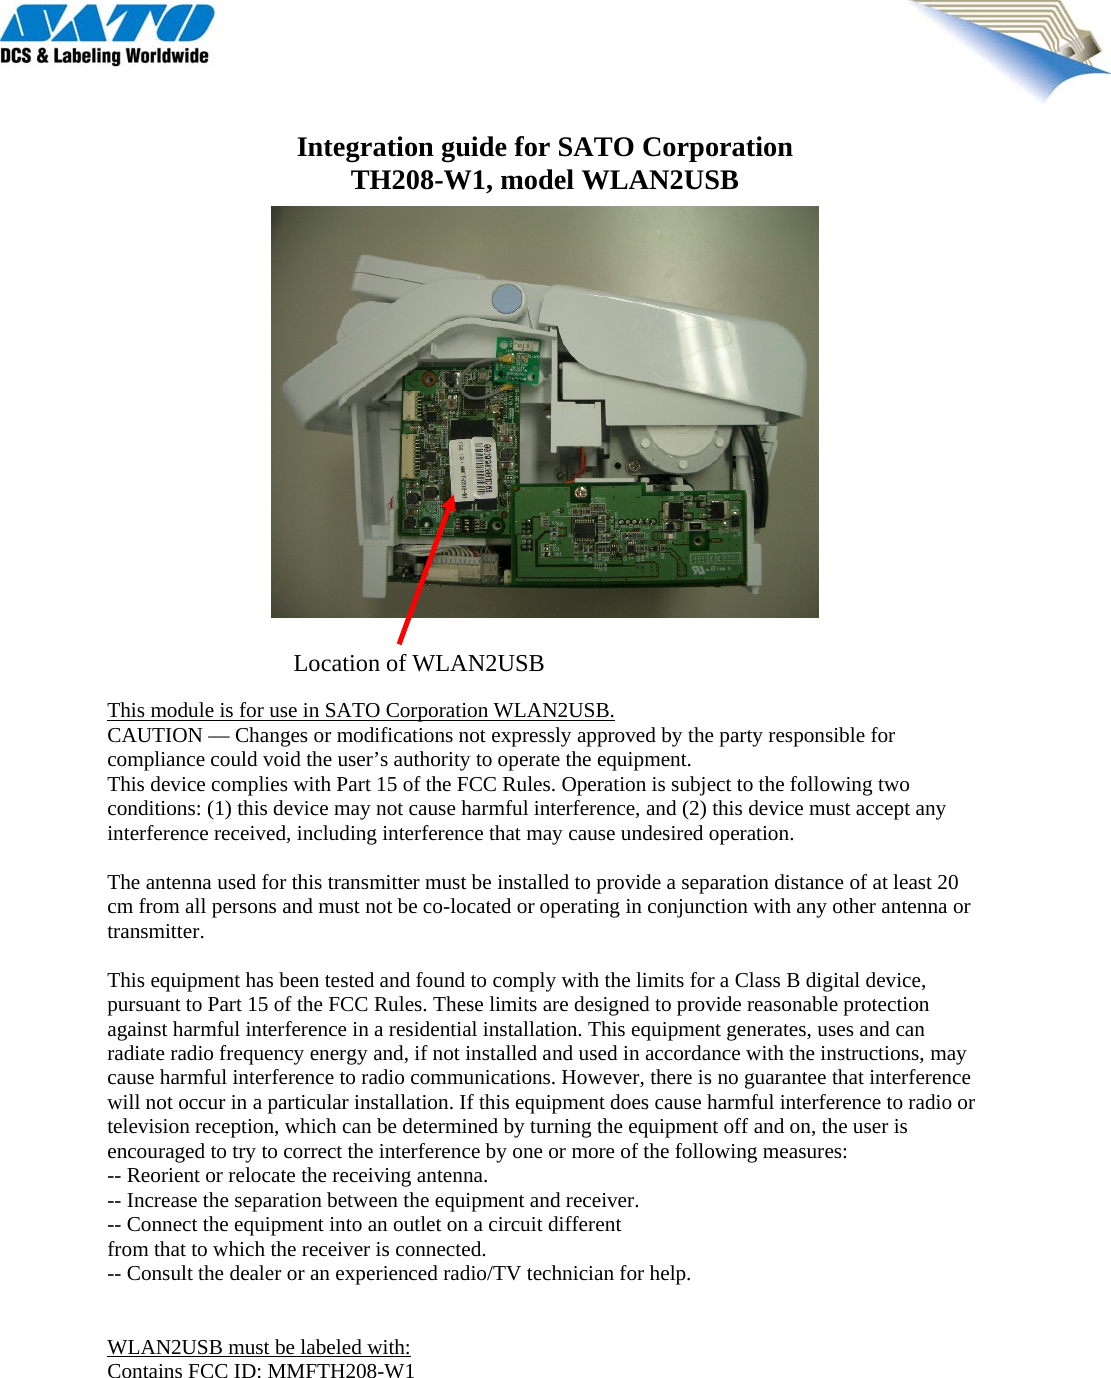  Integration guide for SATO Corporation TH208-W1, model WLAN2USB                   This module is for use in SATO Corporation WLAN2USB. CAUTION — Changes or modifications not expressly approved by the party responsible for compliance could void the user’s authority to operate the equipment. This device complies with Part 15 of the FCC Rules. Operation is subject to the following two conditions: (1) this device may not cause harmful interference, and (2) this device must accept any interference received, including interference that may cause undesired operation.  The antenna used for this transmitter must be installed to provide a separation distance of at least 20 cm from all persons and must not be co-located or operating in conjunction with any other antenna or transmitter.  This equipment has been tested and found to comply with the limits for a Class B digital device, pursuant to Part 15 of the FCC Rules. These limits are designed to provide reasonable protection against harmful interference in a residential installation. This equipment generates, uses and can radiate radio frequency energy and, if not installed and used in accordance with the instructions, may cause harmful interference to radio communications. However, there is no guarantee that interference will not occur in a particular installation. If this equipment does cause harmful interference to radio or television reception, which can be determined by turning the equipment off and on, the user is encouraged to try to correct the interference by one or more of the following measures: -- Reorient or relocate the receiving antenna. -- Increase the separation between the equipment and receiver. -- Connect the equipment into an outlet on a circuit different from that to which the receiver is connected. -- Consult the dealer or an experienced radio/TV technician for help.   WLAN2USB must be labeled with: Contains FCC ID: MMFTH208-W1 Location of WLAN2USB 